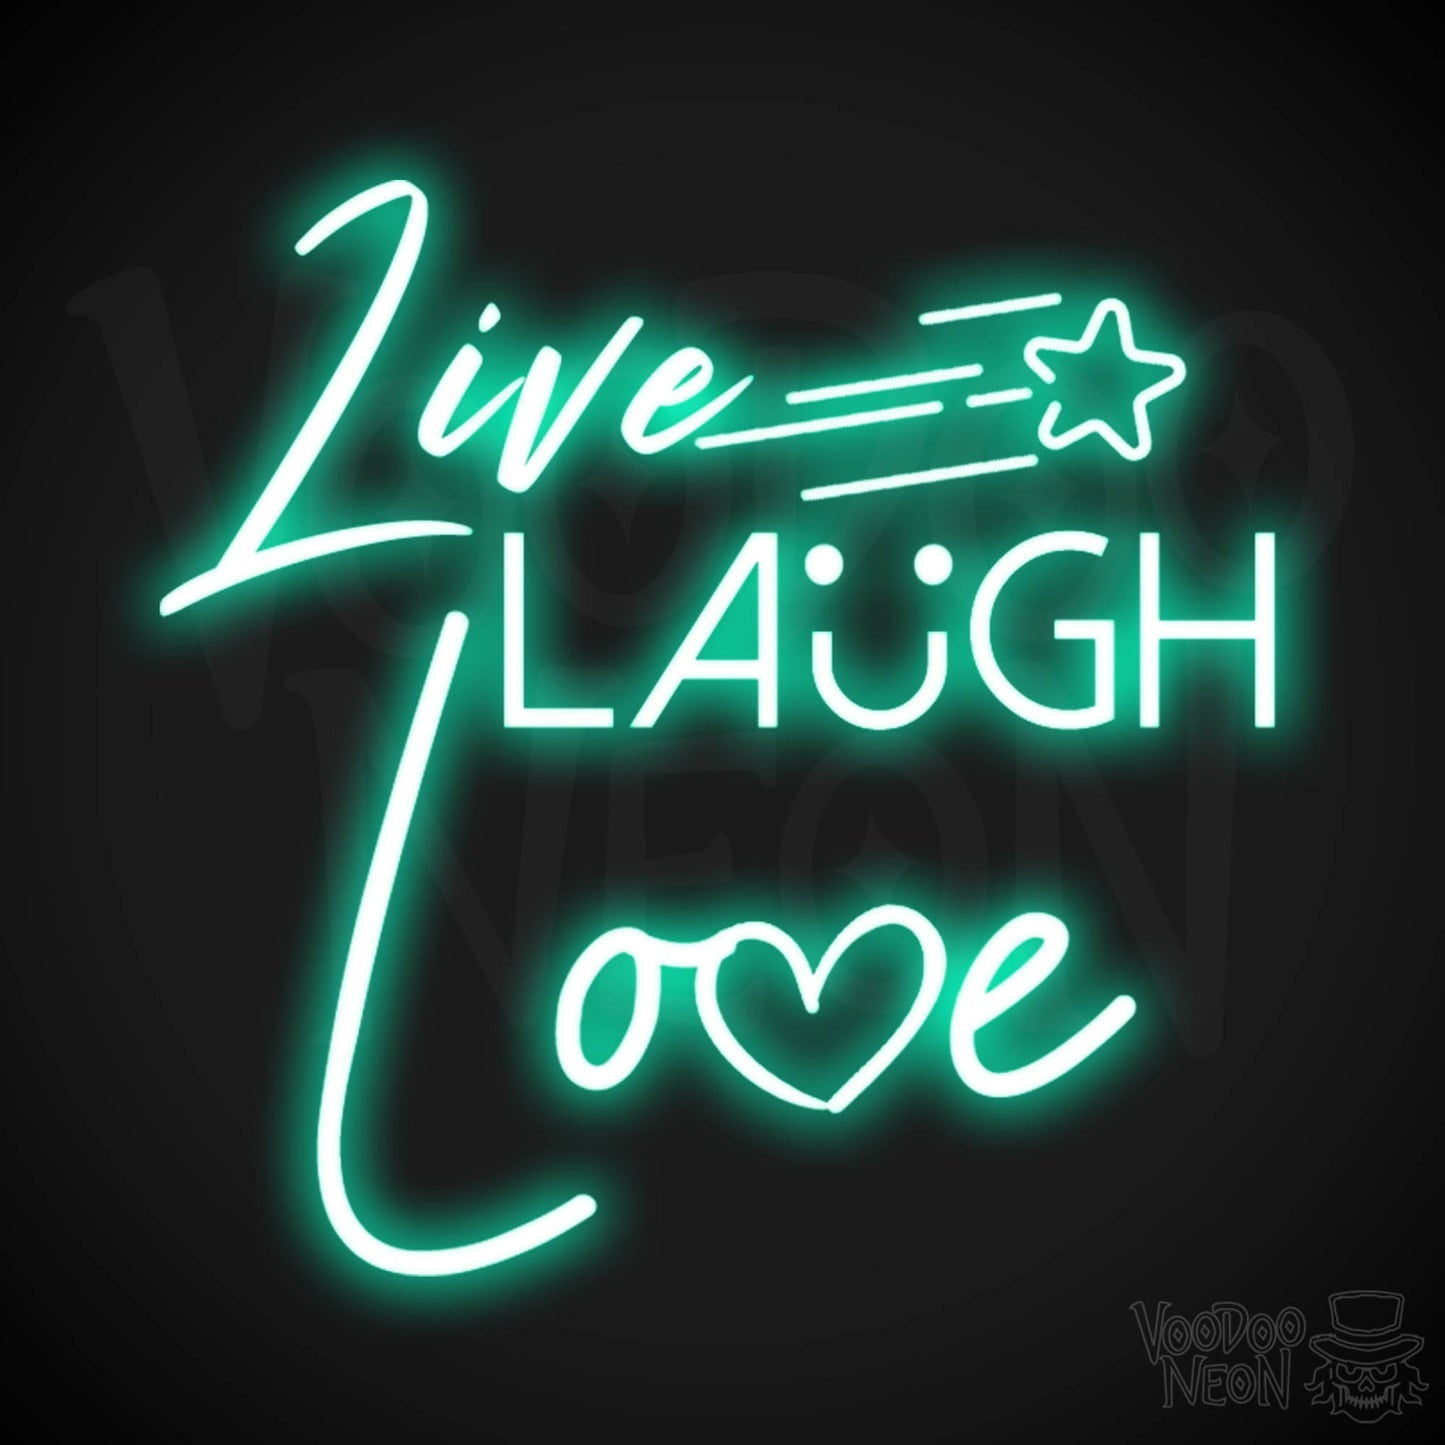 Live Laugh Love Neon Sign - Neon Live Laugh Love Sign - Wall Art - Color Light Green